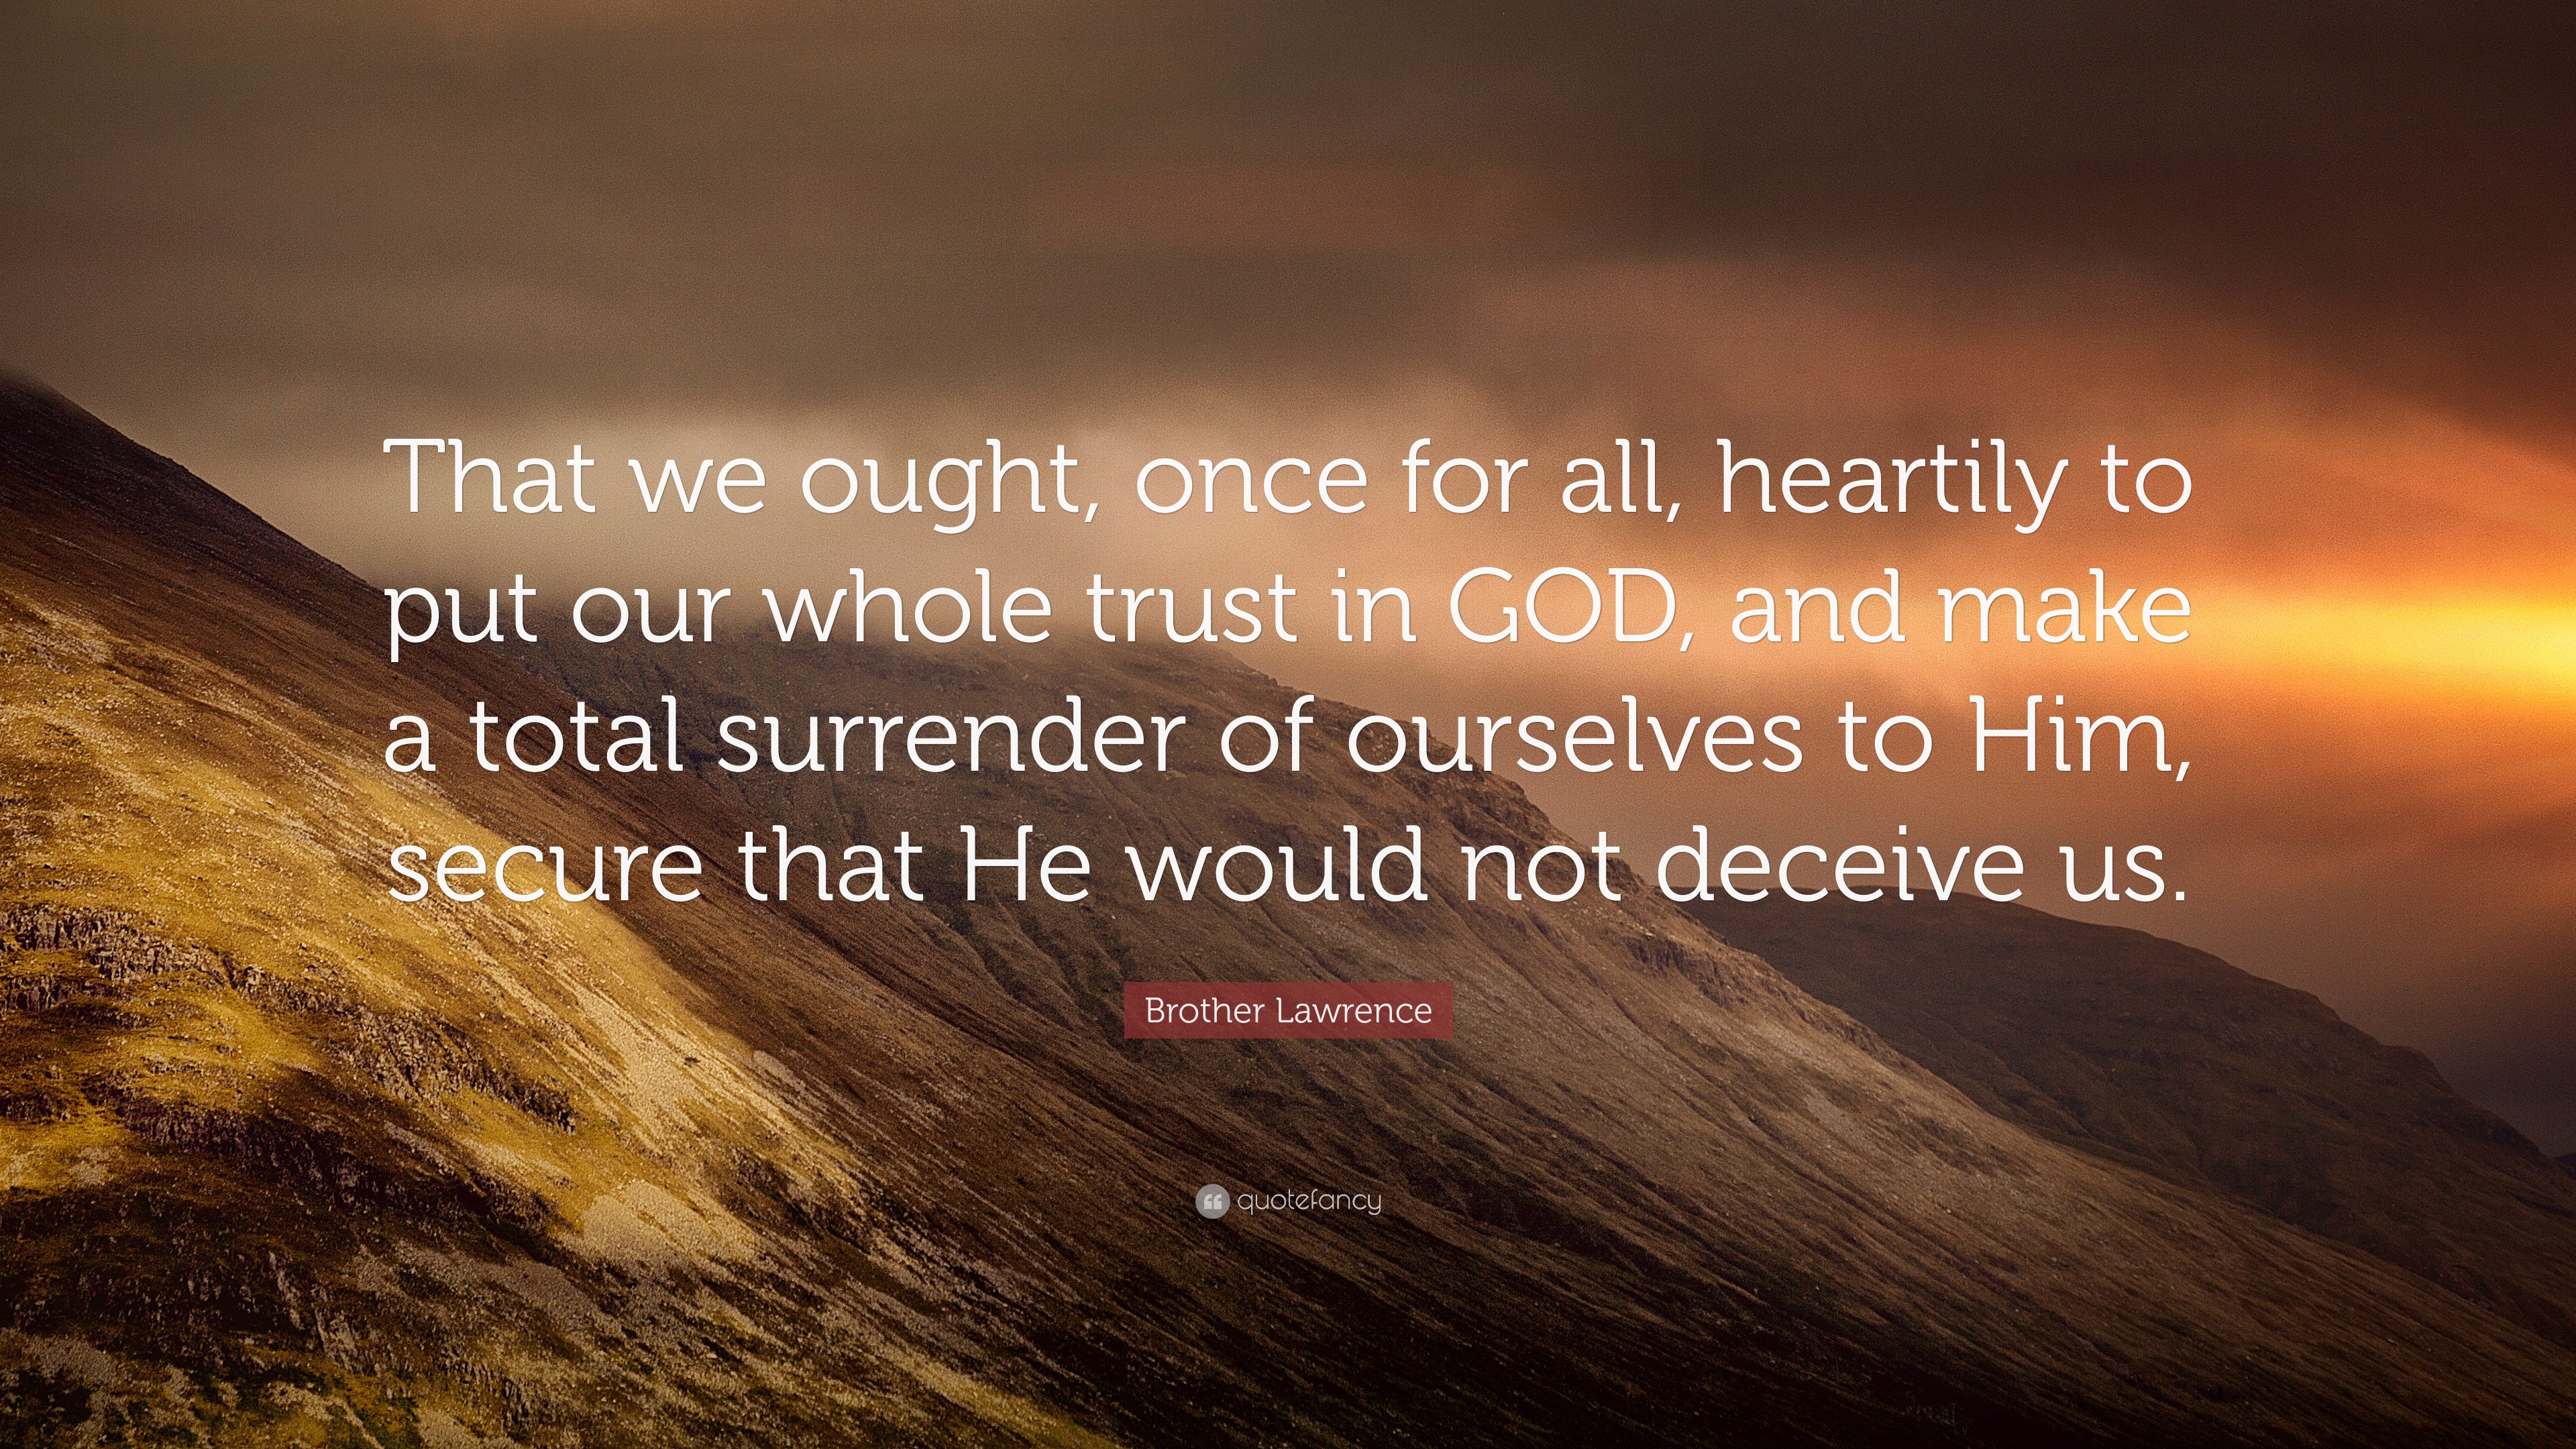 Brother Lawrence Quote: “That we ought, once for all, heartily to put ...